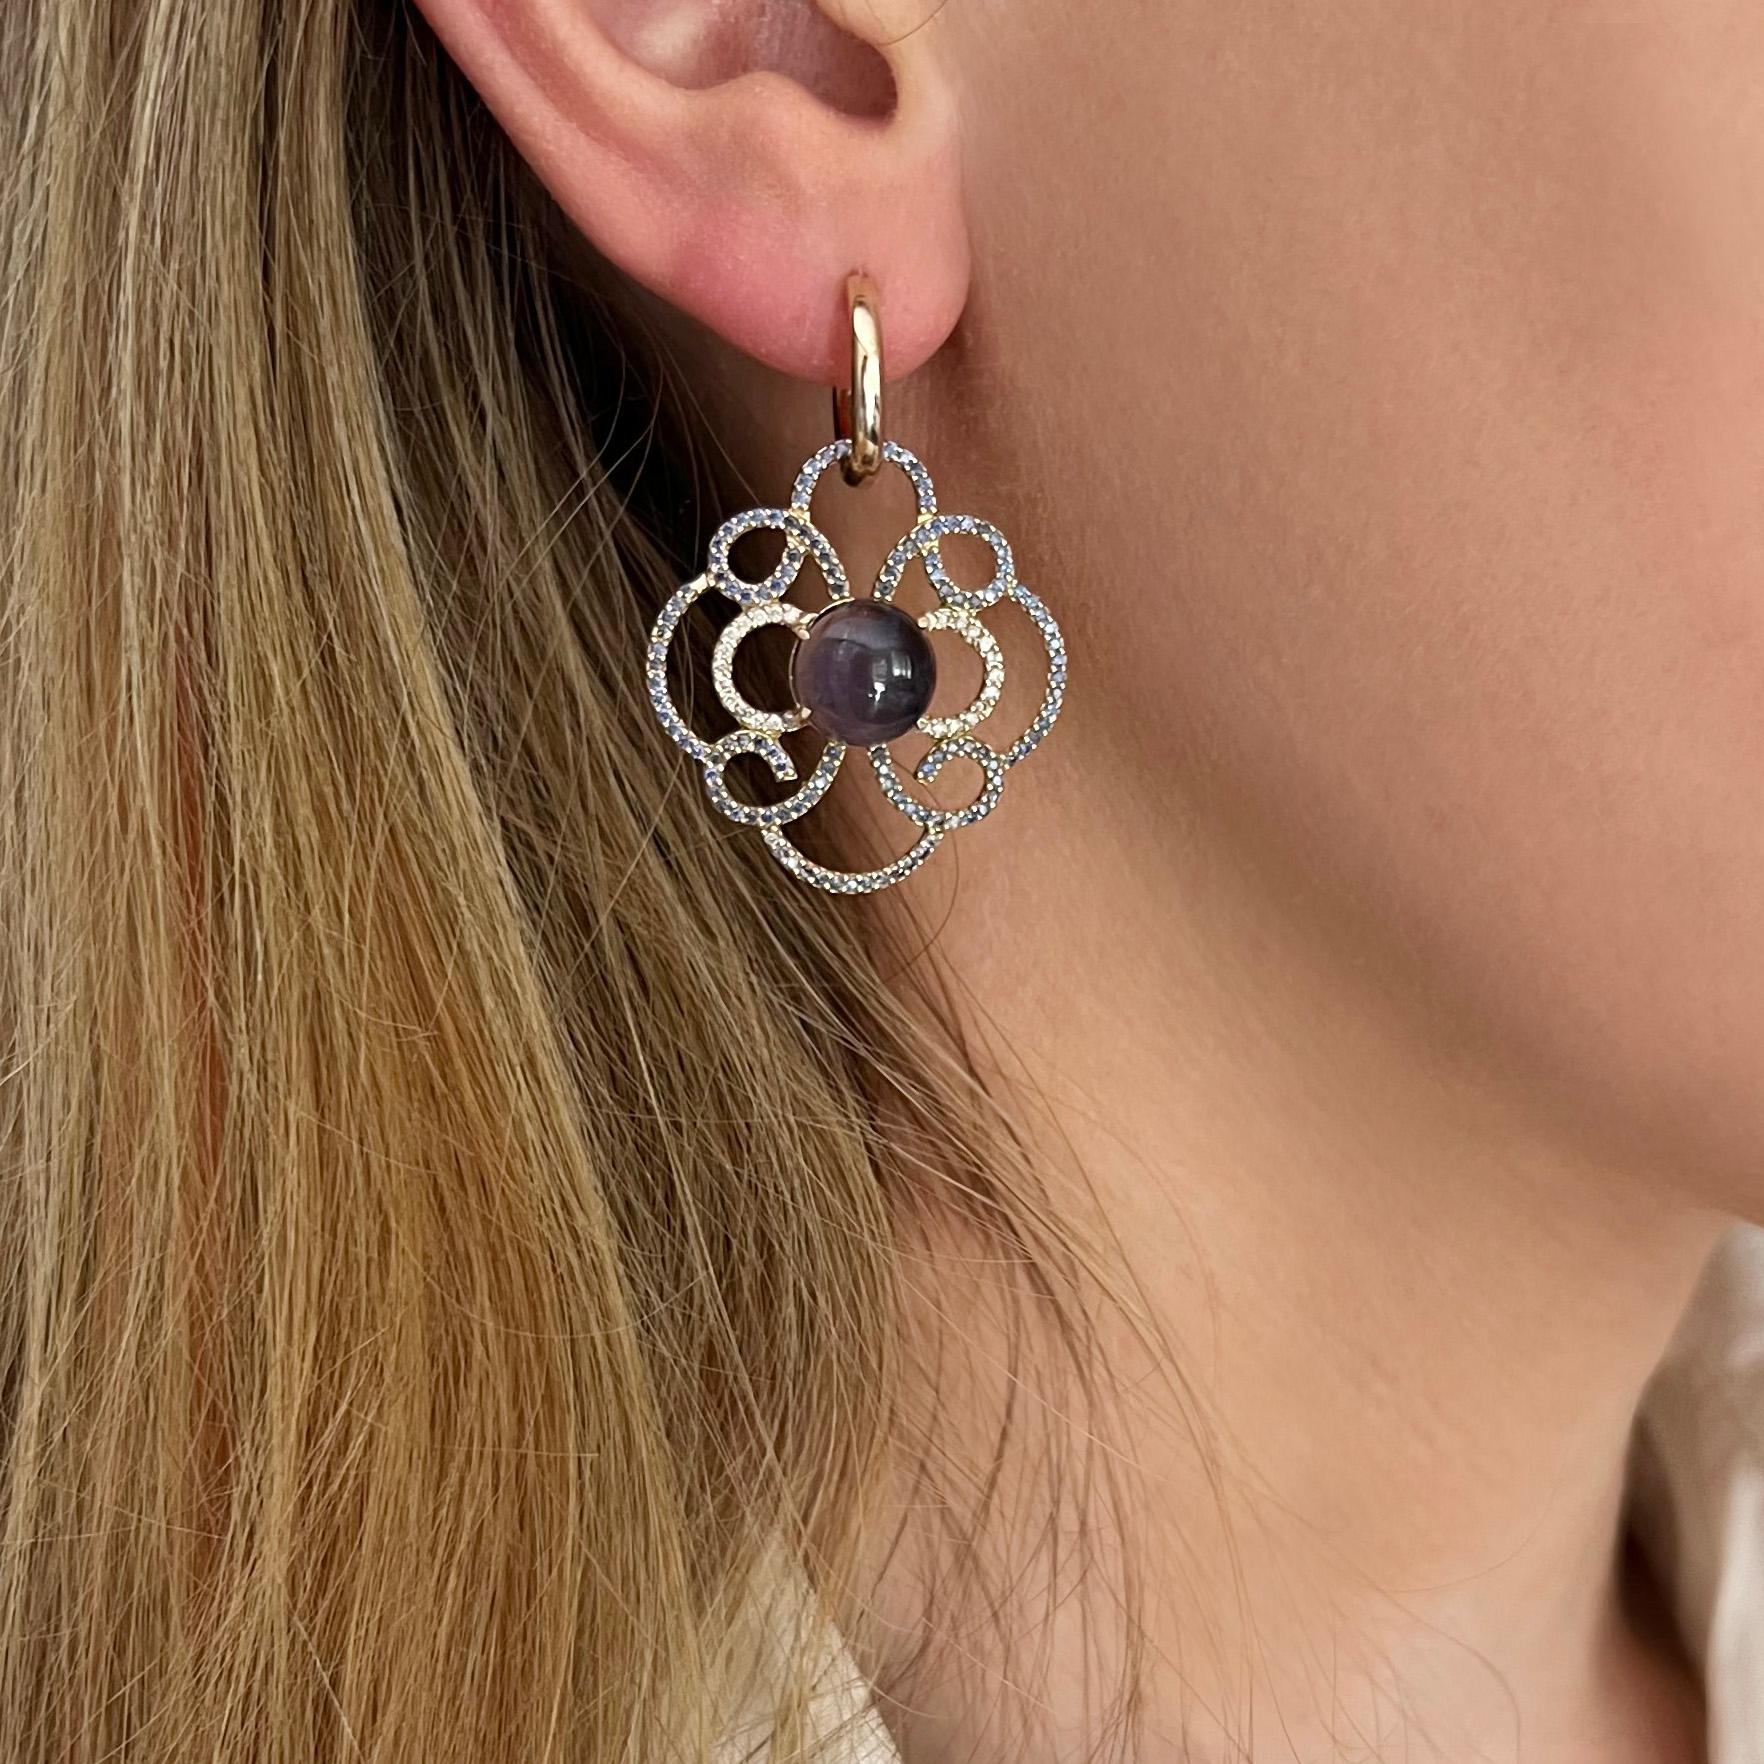 Inspired by curved shapes! Timeless beauty with modern elegance. Curved shapes for a special and unique design.
Made in Italy by Stanoppi Jewellery since 1948

Earrings in 14k rose gold with Iolite (round cabochon cut, size: 10 mm), tanzanites and